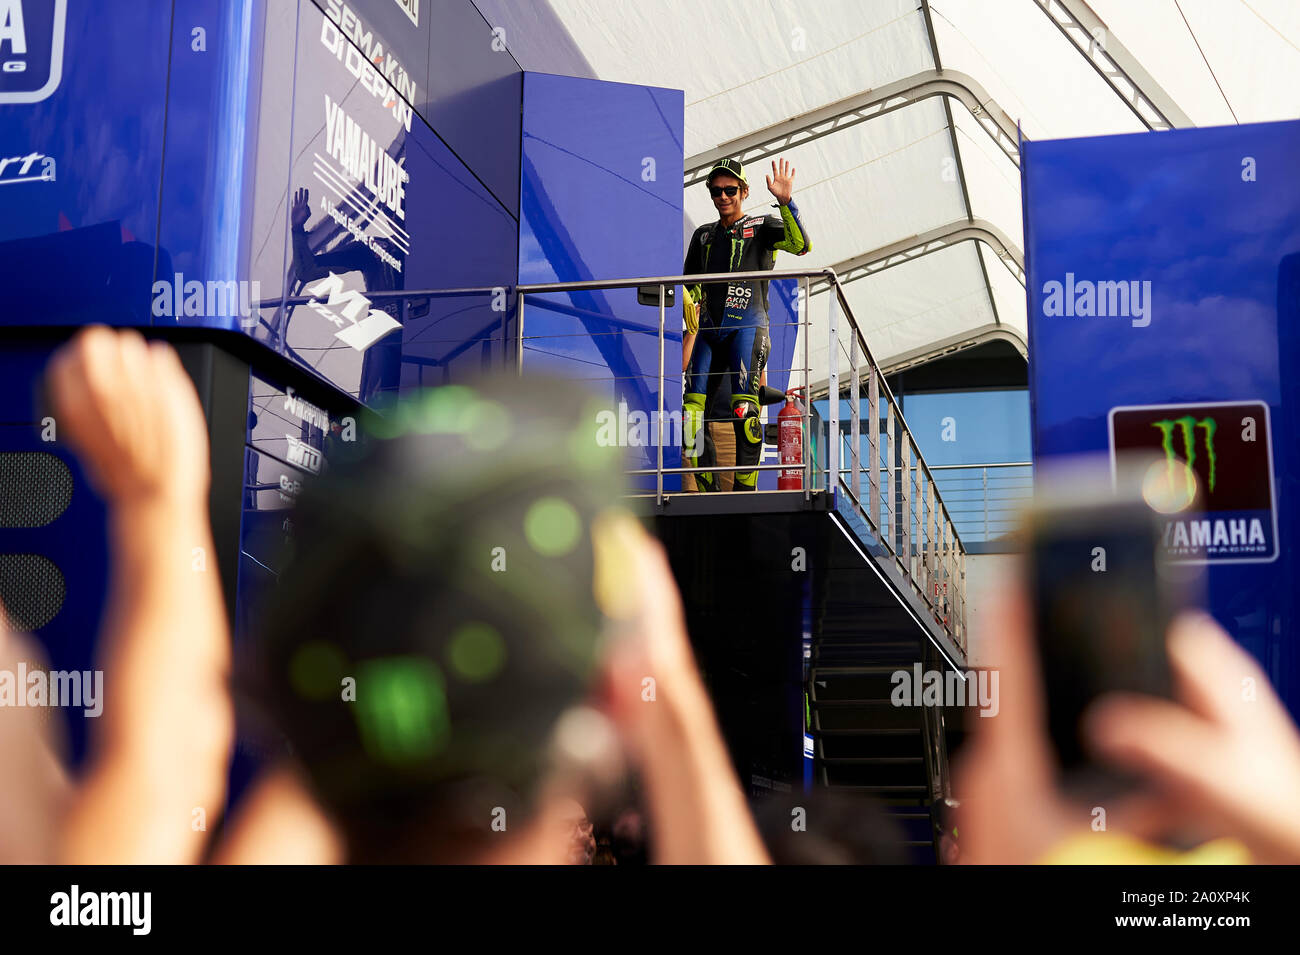 22nd September 2019; Ciudad del Motor de Aragon, Alcaniz, Spain; Aragon Motorcycle Grand Prix, Race Day; Valentino Rossi of the Monster Energy Yamaha Team greets his fans after the MotoGP warm up Stock Photo